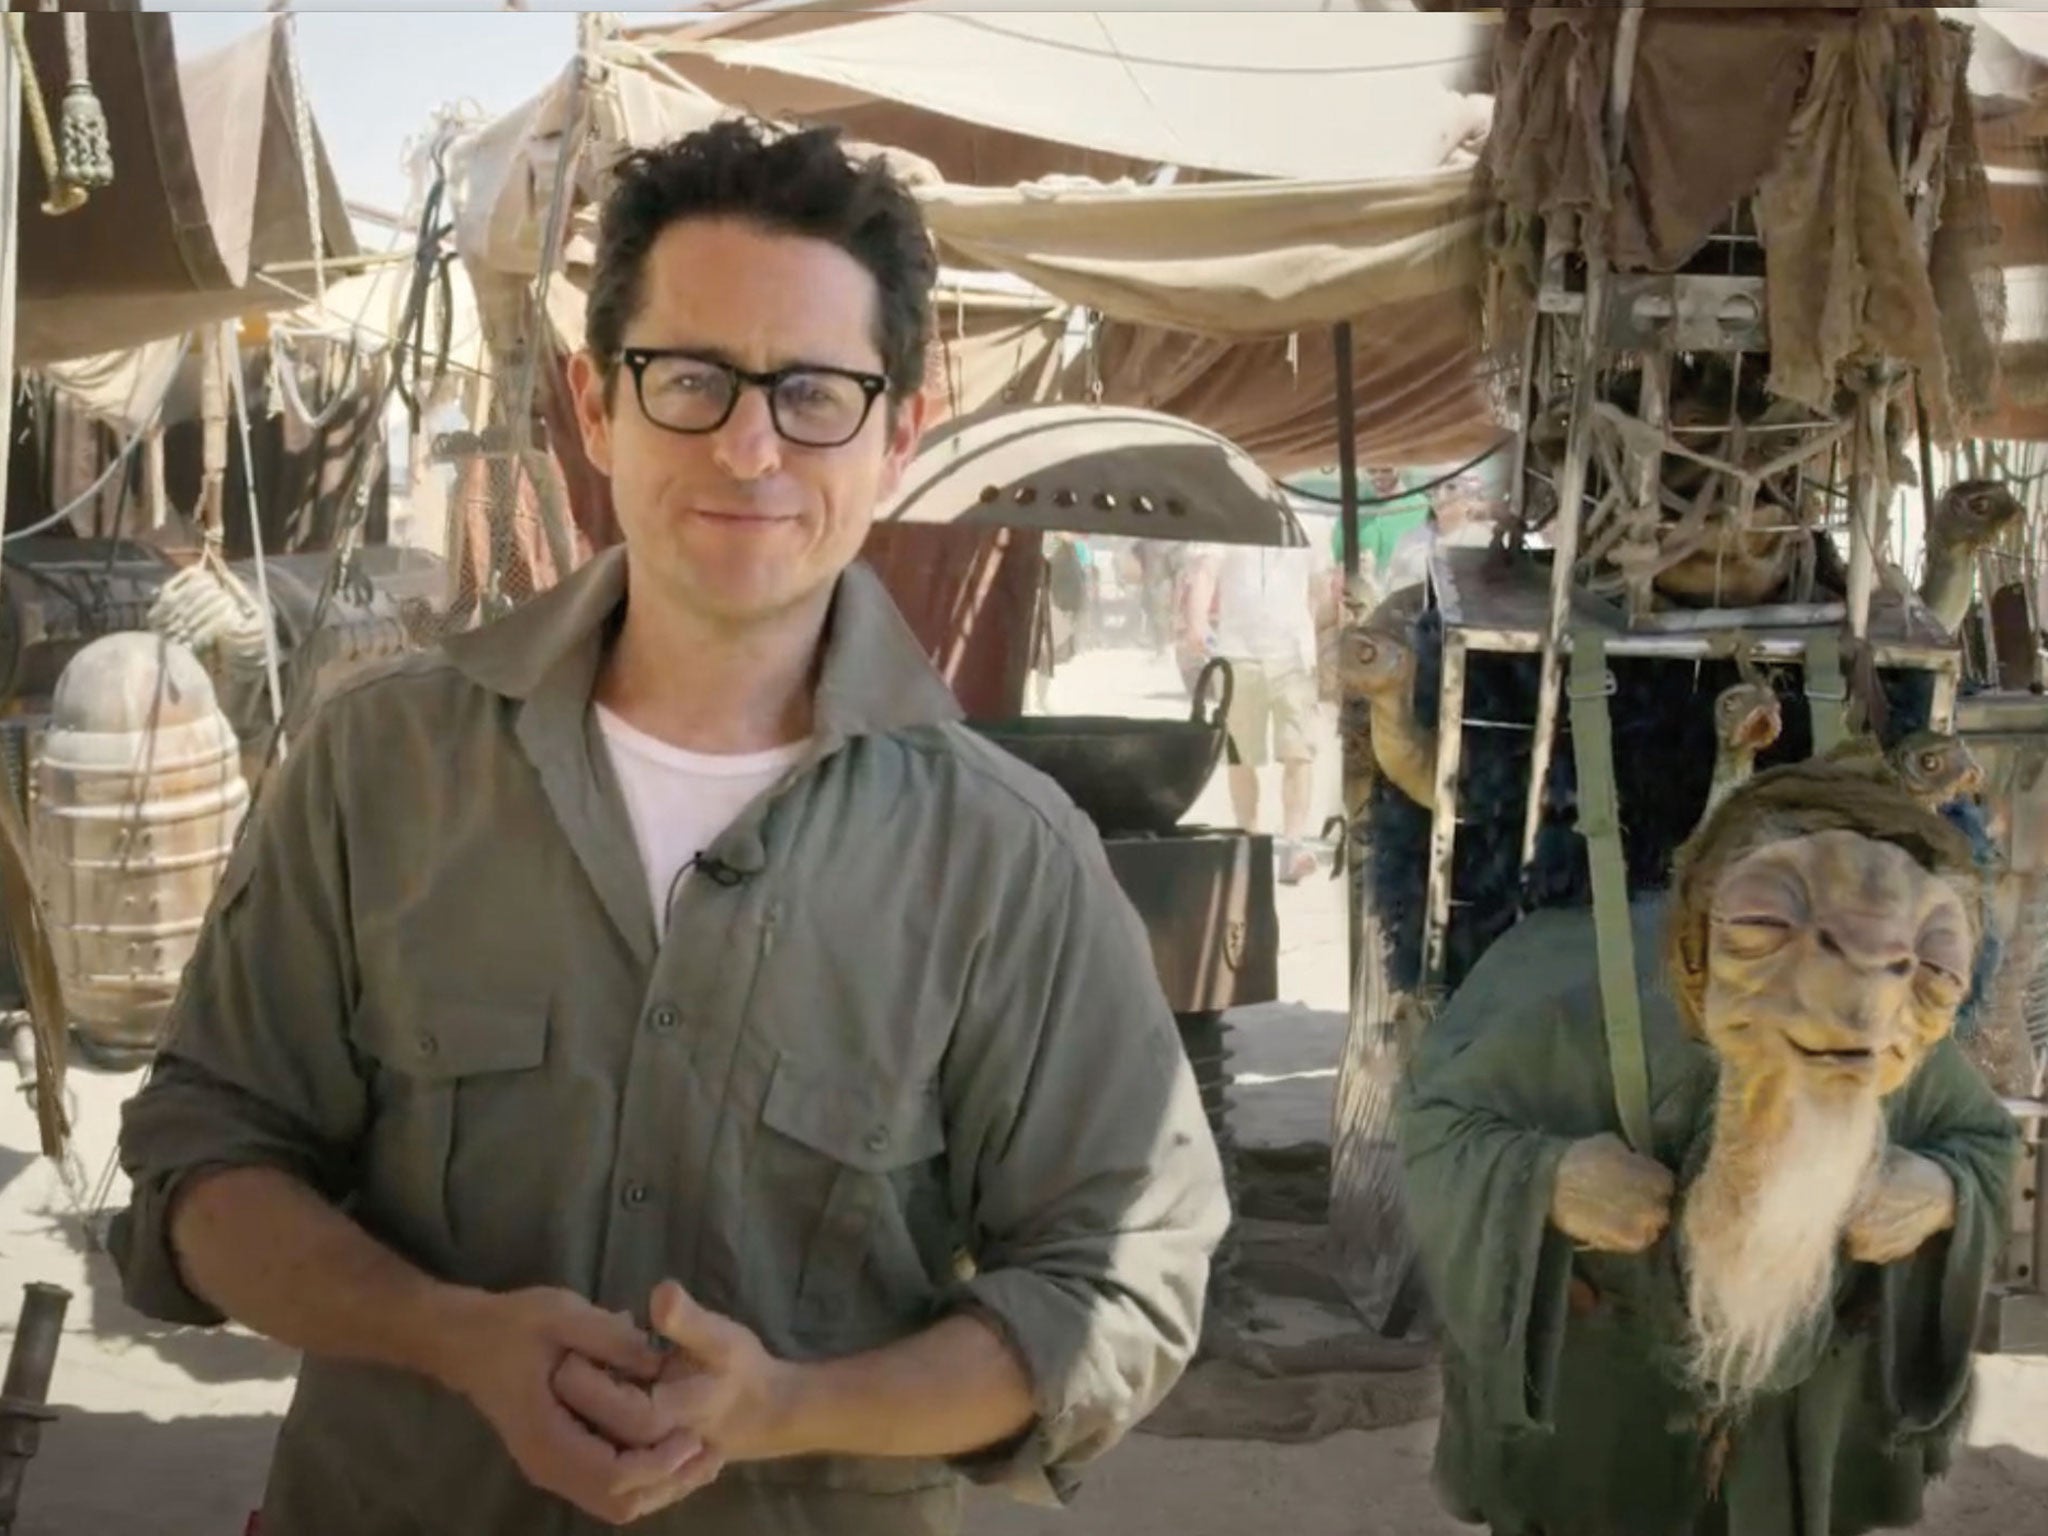 JJ Abrams on the set of Star Wars: The Force Awakens